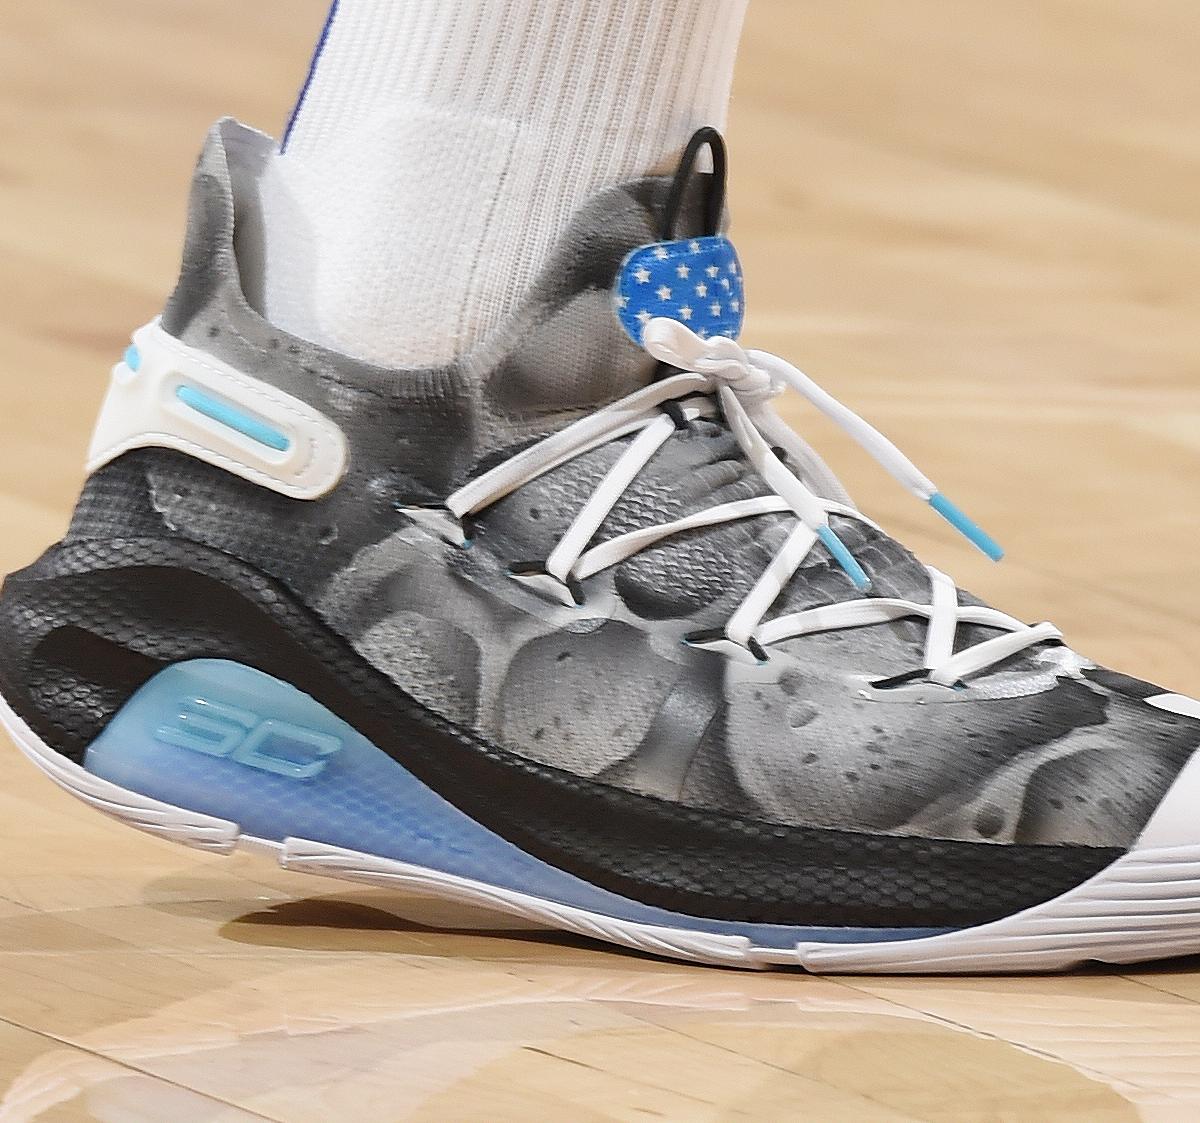 Stephen Curry's Game-Worn 'Moon Landing' Shoes Sell for $58,100 at ...